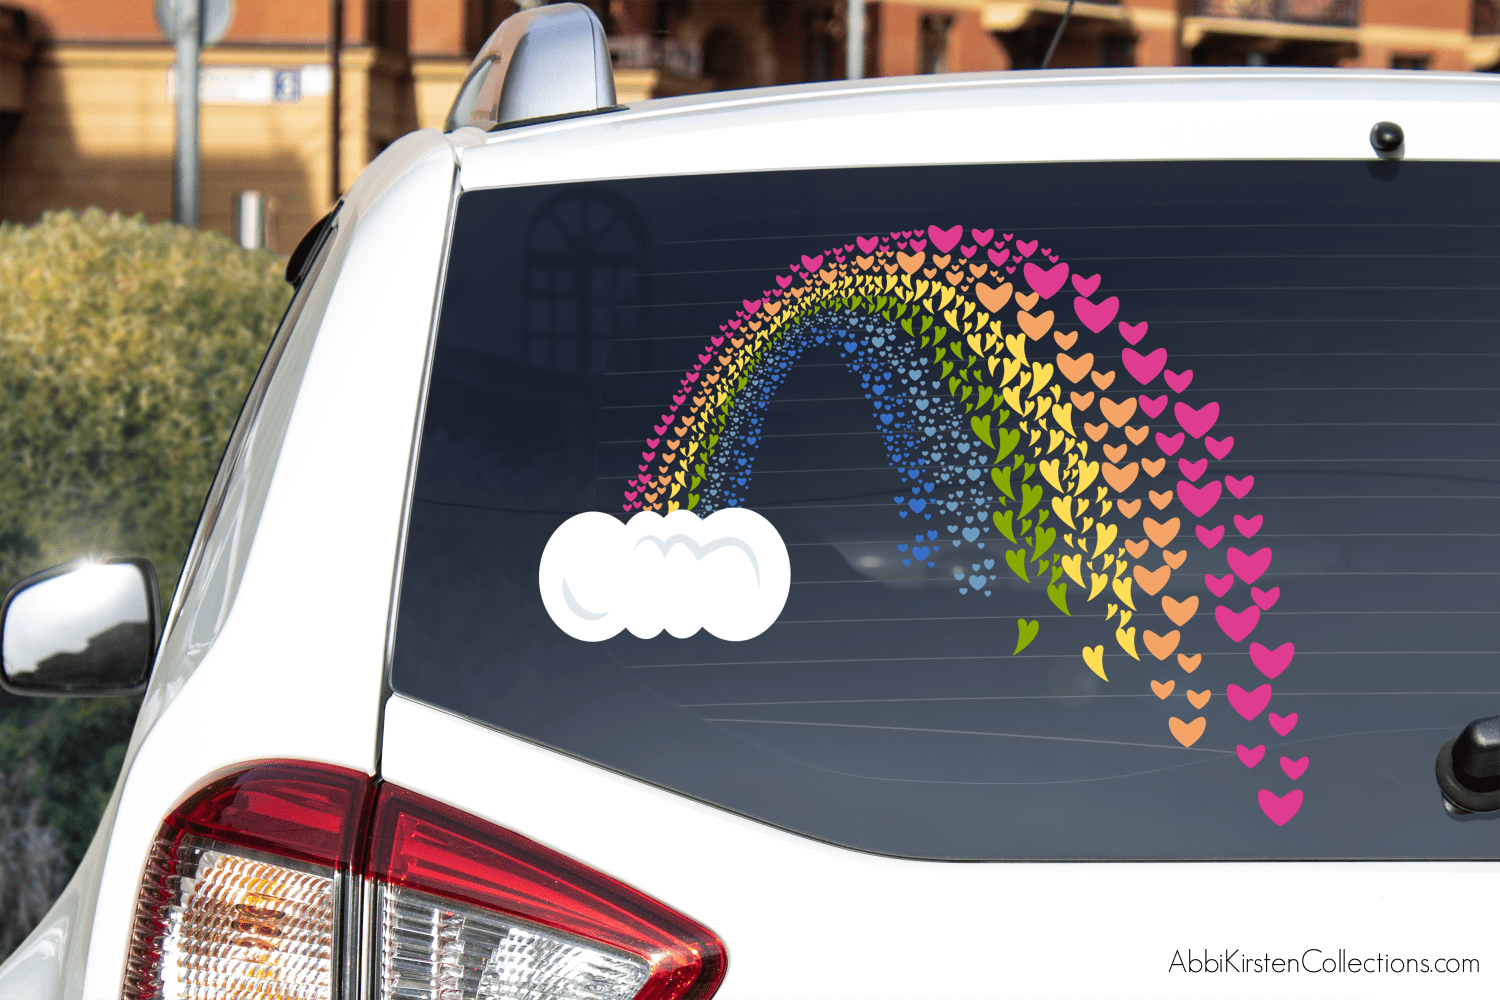 A rainbow SVG window cling made up of colorful hearts pouring out of a cloud on the back window of a white car.